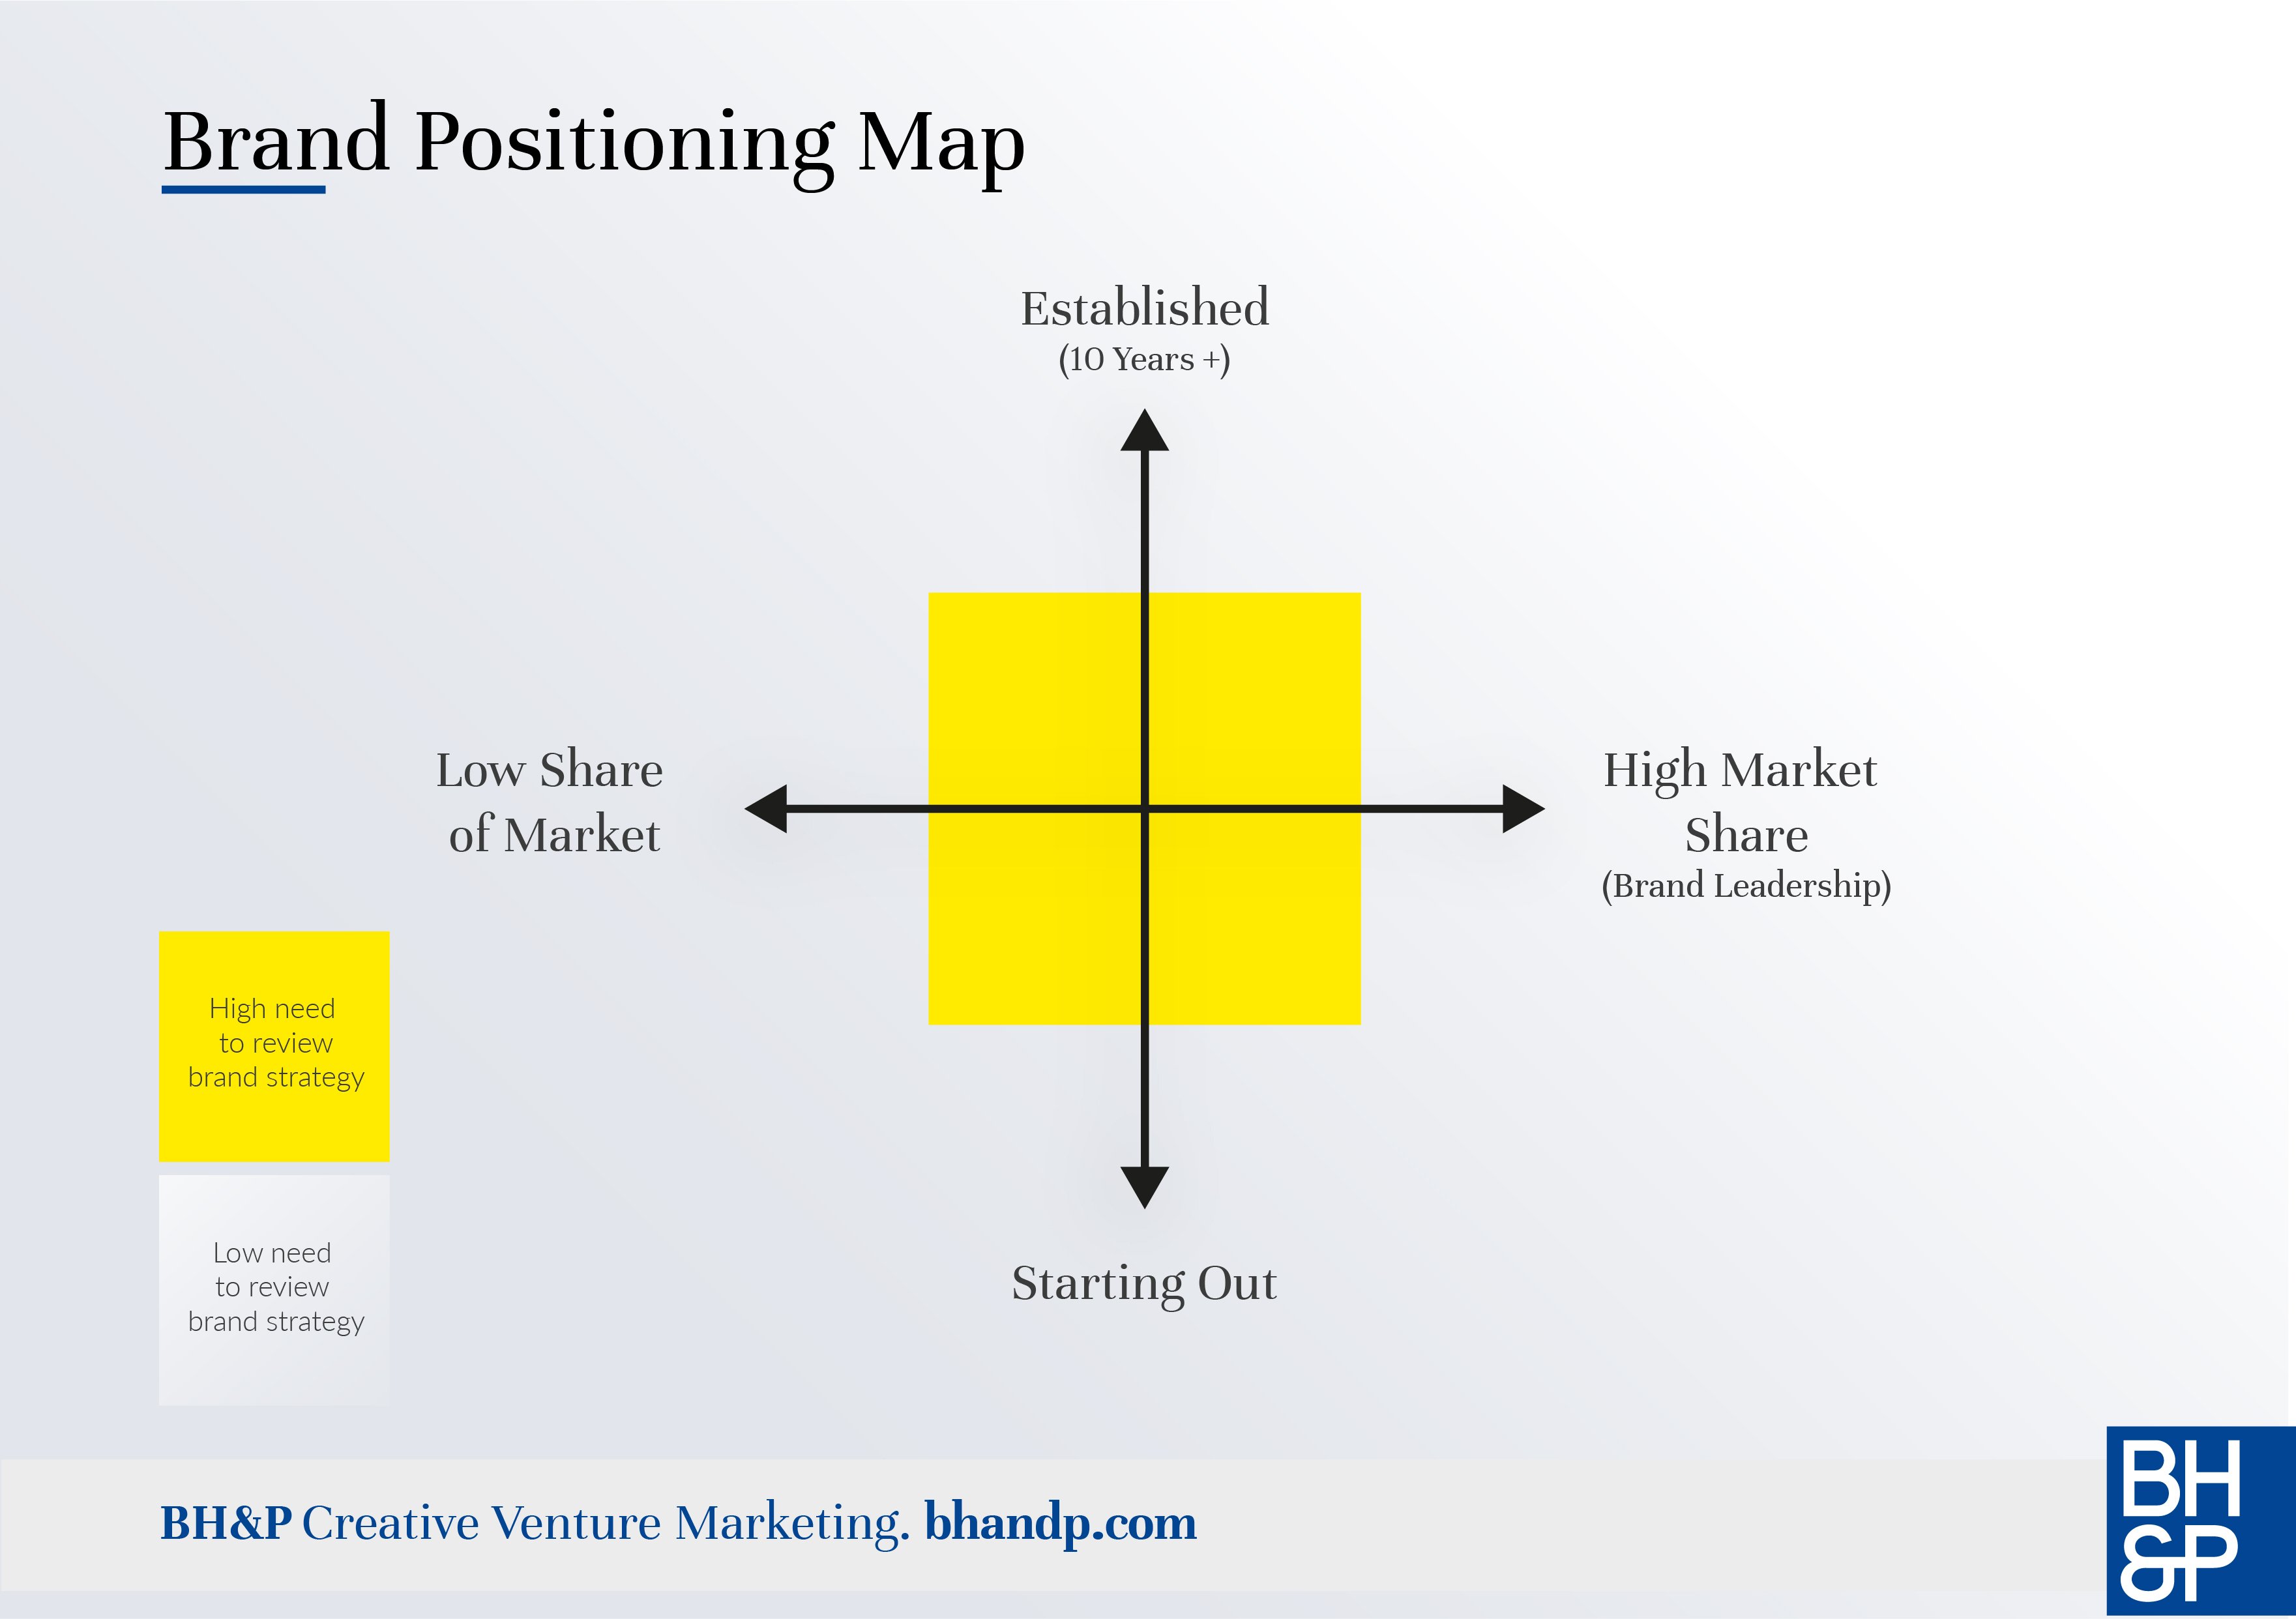 BH&P_Positioning Map